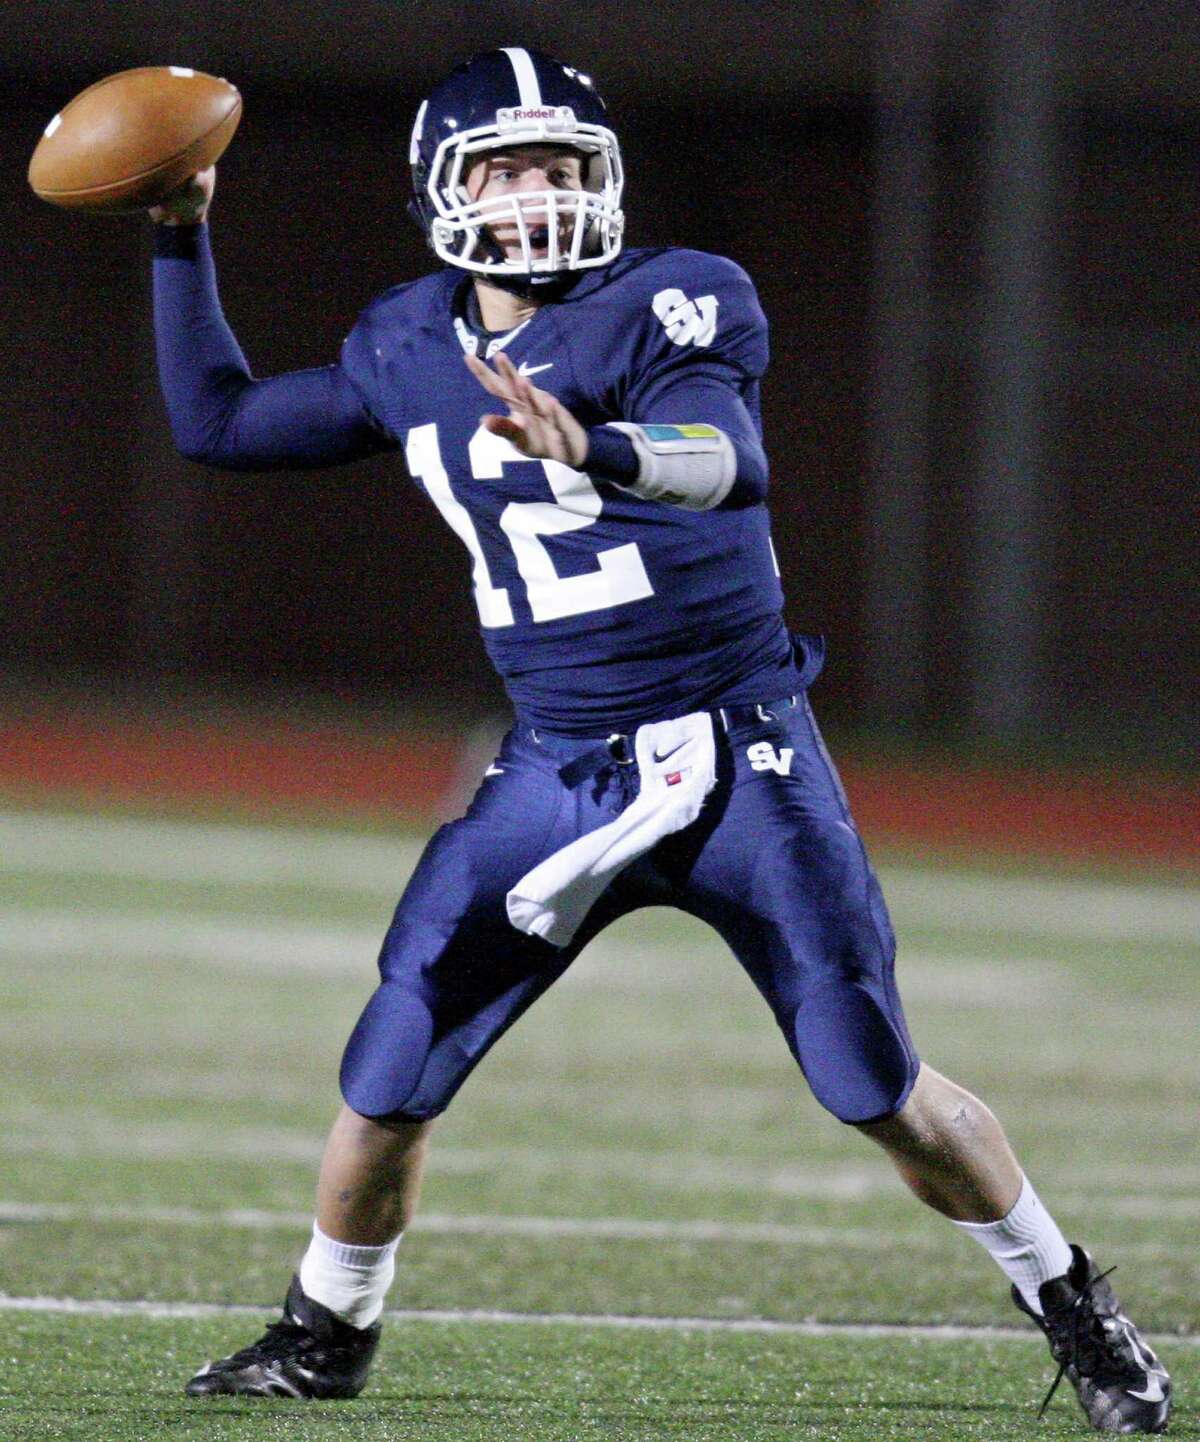 Smithson Valley's Garrett Smith passes against New Braunfels Canyon during first half action Friday Oct. 26, 2012 at Ranger Stadium in Spring Branch, Tx.